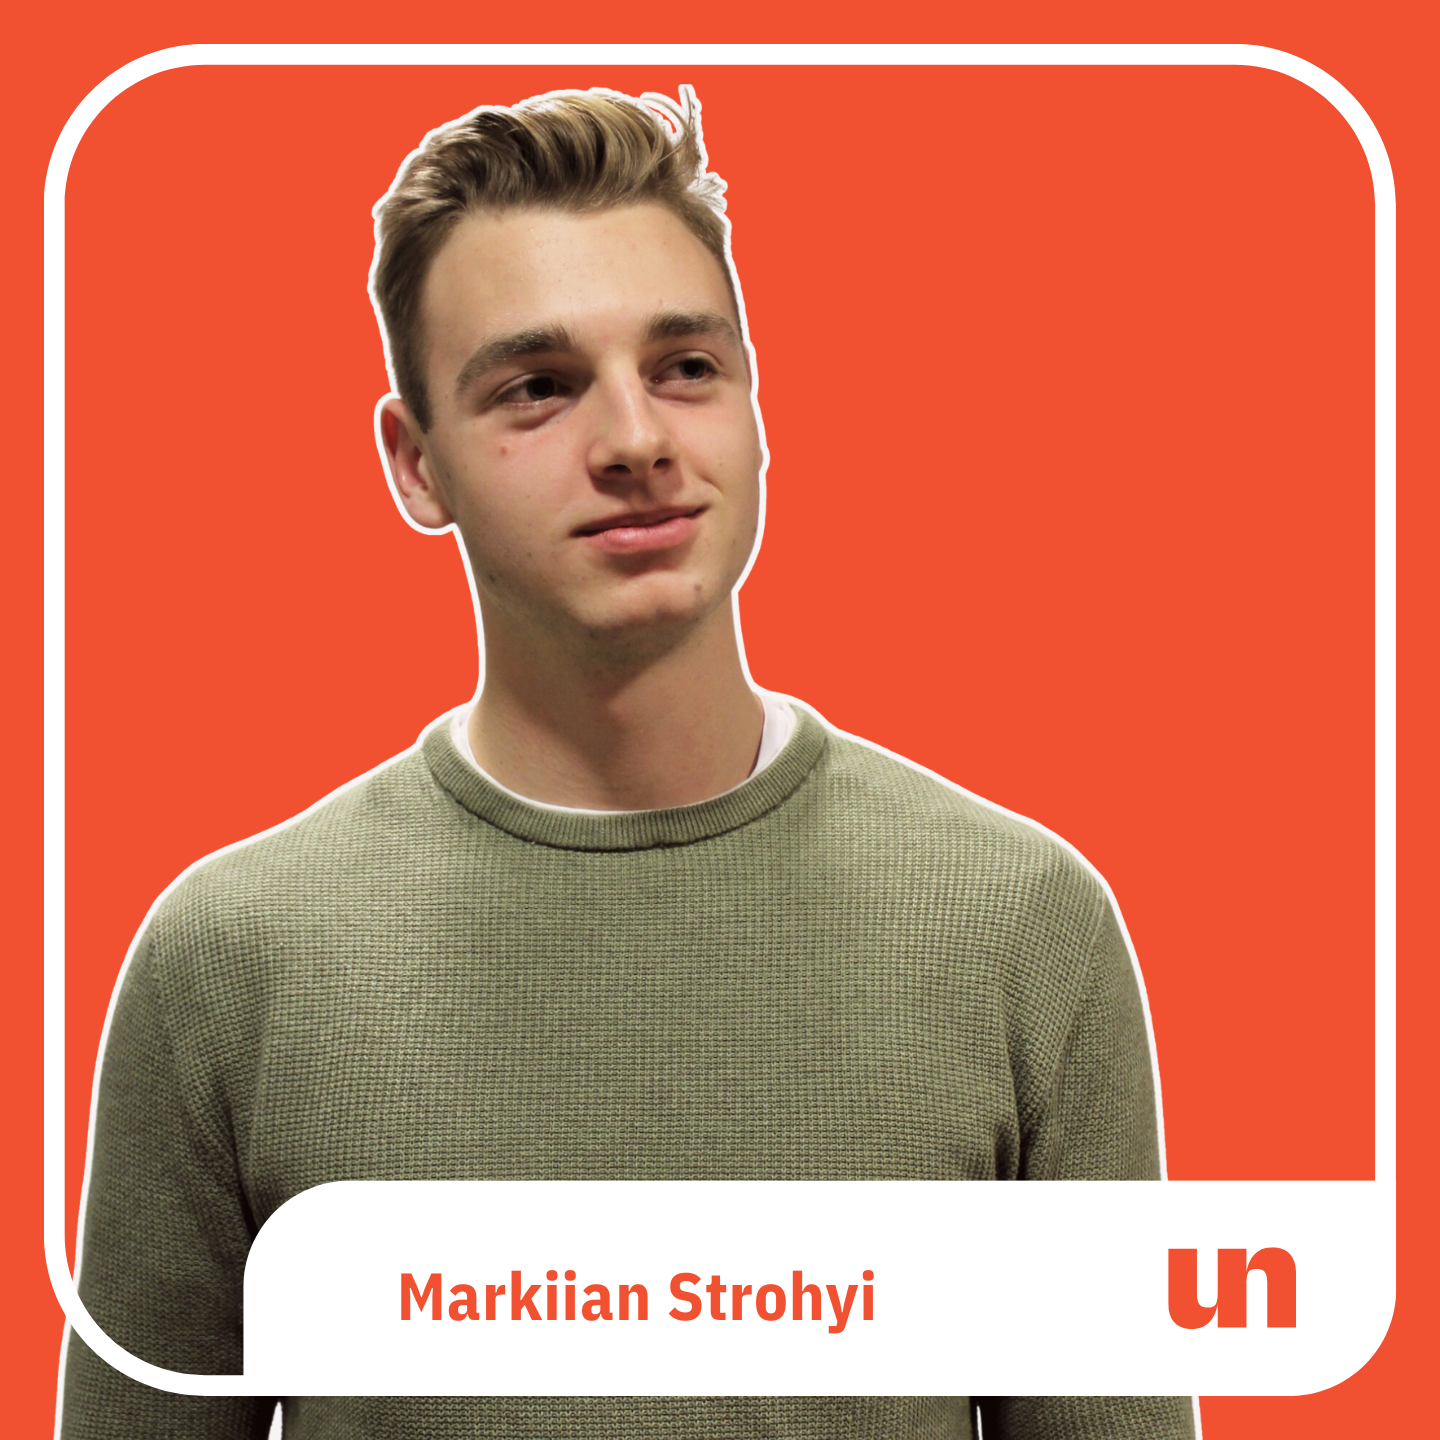 CLICK AND READ MORE ABOUT MARKIIAN